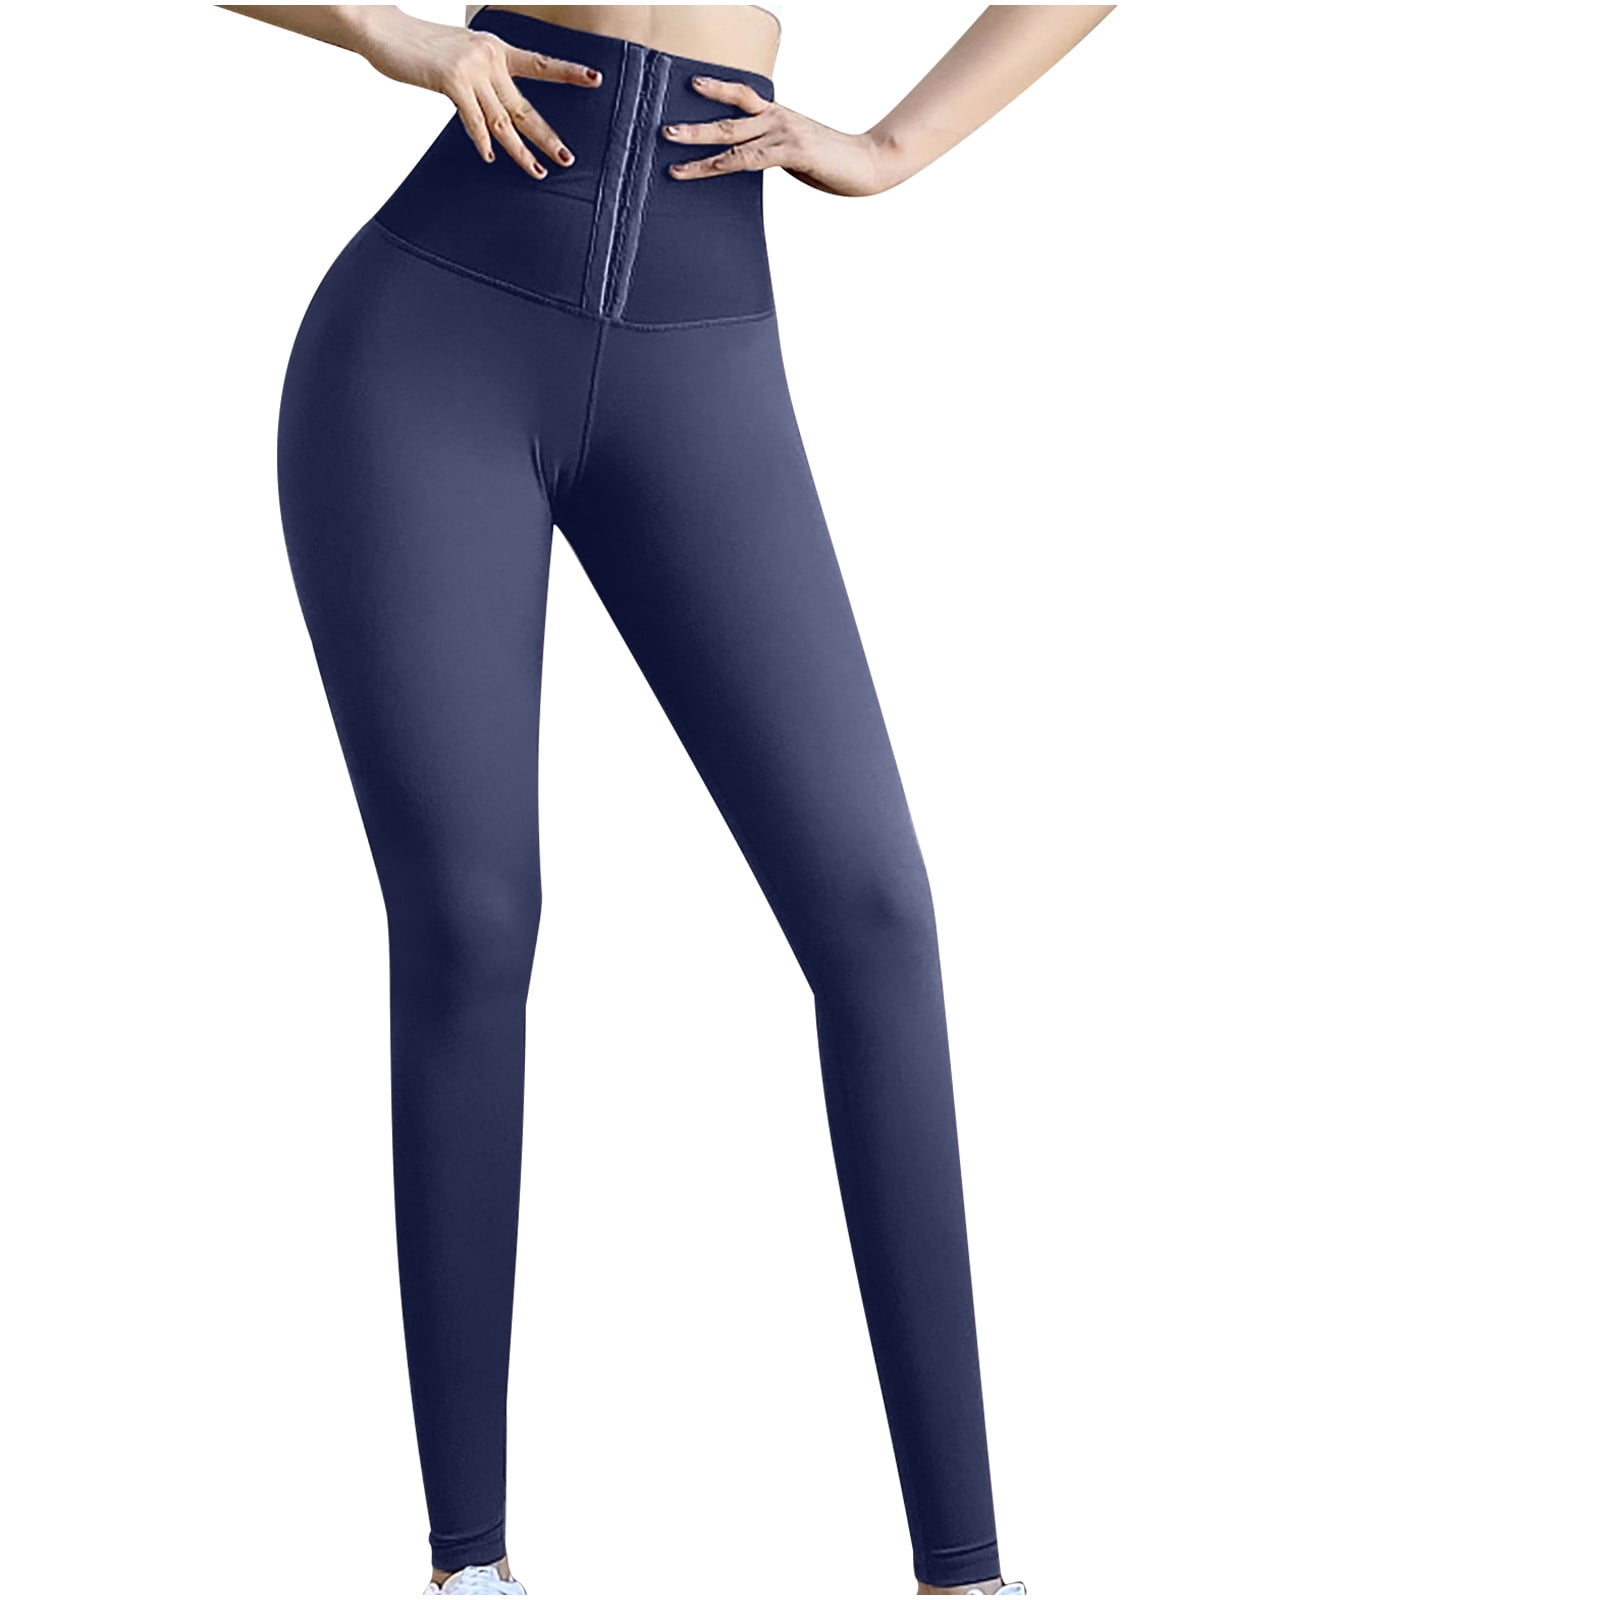 High Waisted Pastel Midnight Blue Leggings Yoga Pants for Women With  Pockets, Tummy Control, Quality Fabric, 28 -  New Zealand